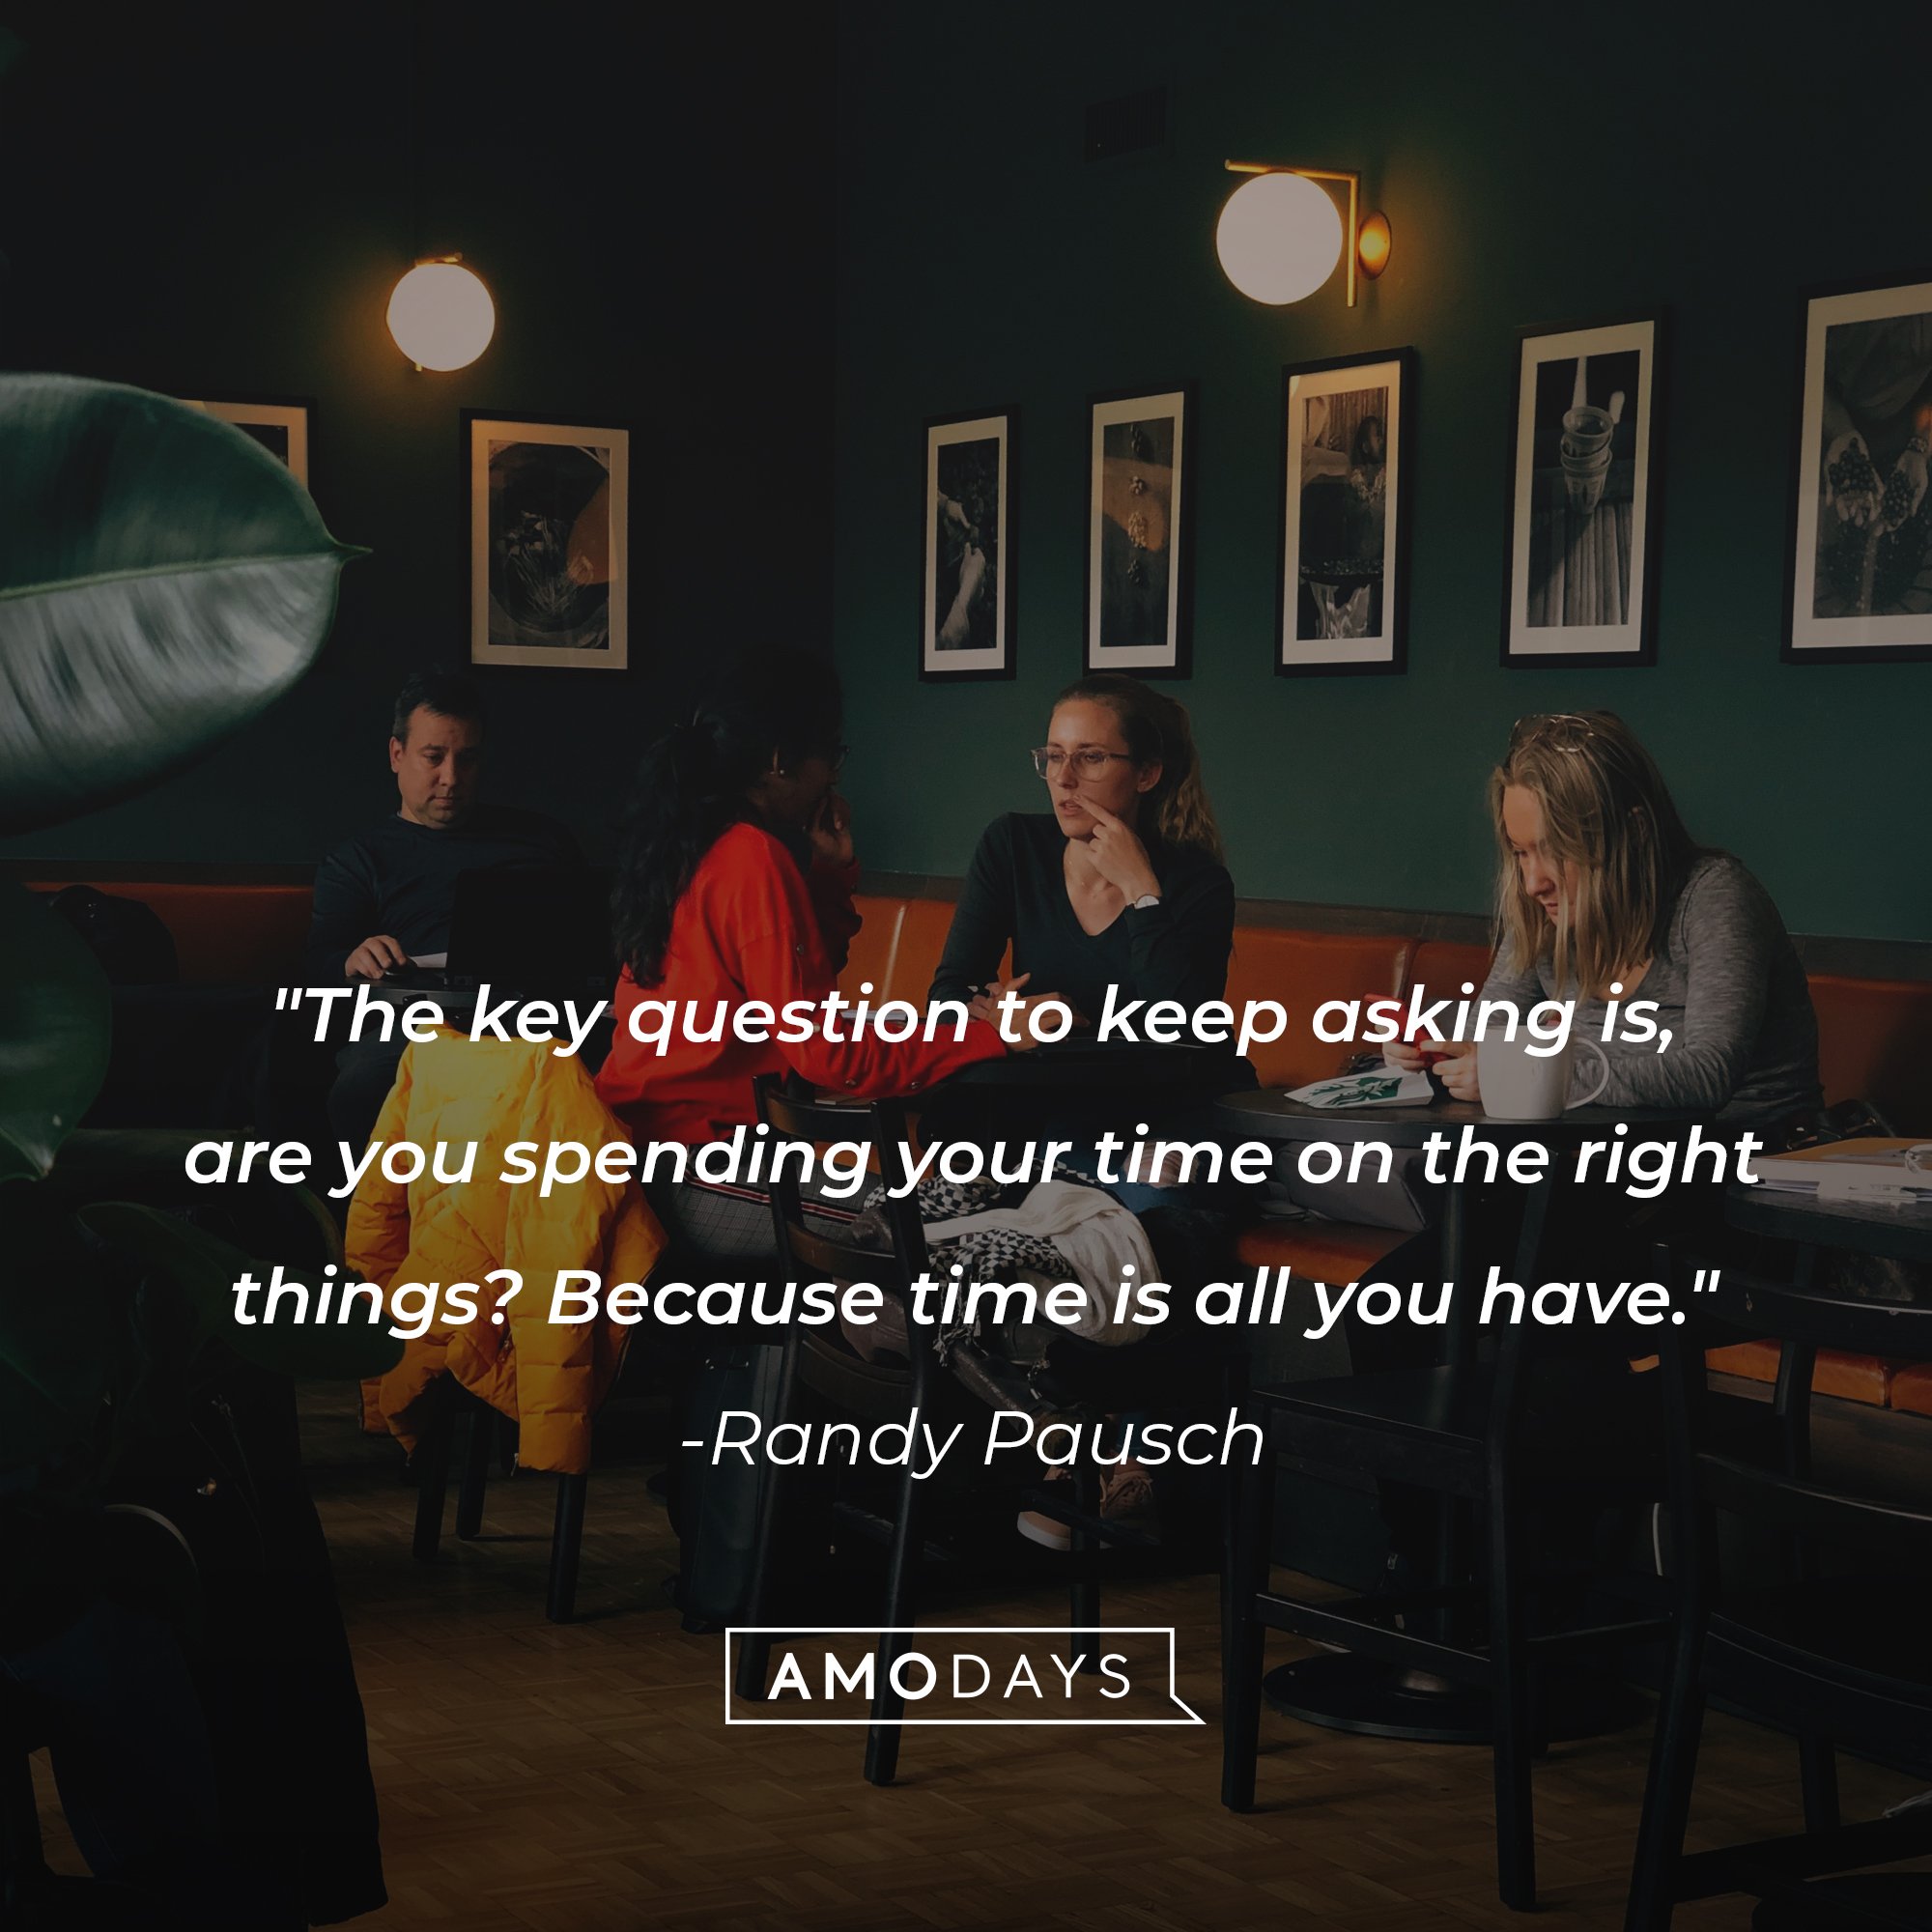 Randy Pausch’s quote: "The key question to keep asking is, are you spending your time on the right things? Because time is all you have." | Image: AmoDays 